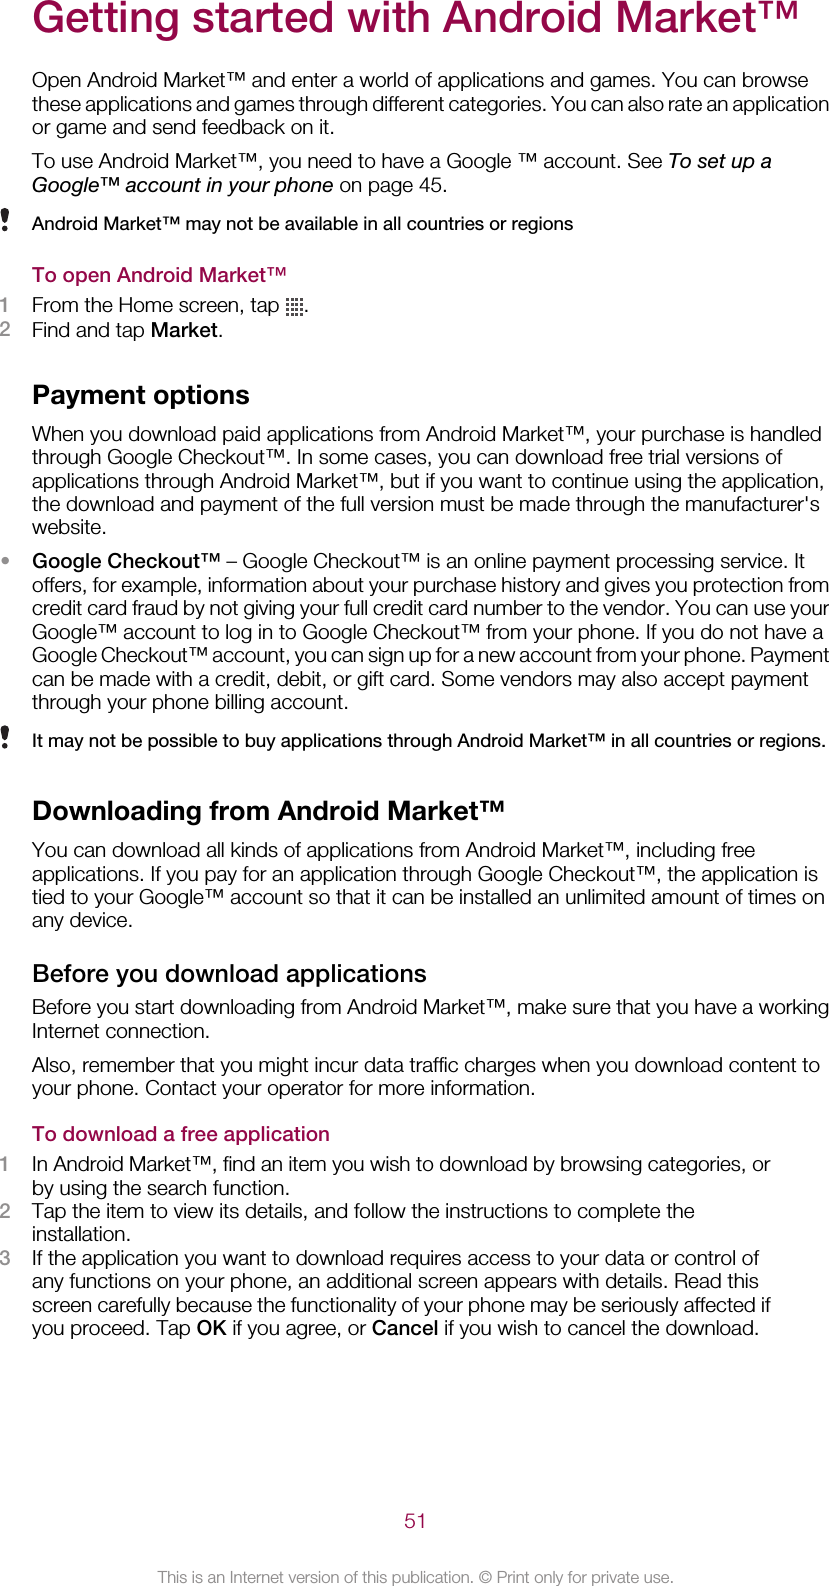 Getting started with Android Market™Open Android Market™ and enter a world of applications and games. You can browsethese applications and games through different categories. You can also rate an applicationor game and send feedback on it.To use Android Market™, you need to have a Google ™ account. See To set up aGoogle™ account in your phone on page 45.Android Market™ may not be available in all countries or regionsTo open Android Market™1From the Home screen, tap  .2Find and tap Market.Payment optionsWhen you download paid applications from Android Market™, your purchase is handledthrough Google Checkout™. In some cases, you can download free trial versions ofapplications through Android Market™, but if you want to continue using the application,the download and payment of the full version must be made through the manufacturer&apos;swebsite.•Google Checkout™ – Google Checkout™ is an online payment processing service. Itoffers, for example, information about your purchase history and gives you protection fromcredit card fraud by not giving your full credit card number to the vendor. You can use yourGoogle™ account to log in to Google Checkout™ from your phone. If you do not have aGoogle Checkout™ account, you can sign up for a new account from your phone. Paymentcan be made with a credit, debit, or gift card. Some vendors may also accept paymentthrough your phone billing account.It may not be possible to buy applications through Android Market™ in all countries or regions.Downloading from Android Market™You can download all kinds of applications from Android Market™, including freeapplications. If you pay for an application through Google Checkout™, the application istied to your Google™ account so that it can be installed an unlimited amount of times onany device.Before you download applicationsBefore you start downloading from Android Market™, make sure that you have a workingInternet connection.Also, remember that you might incur data traffic charges when you download content toyour phone. Contact your operator for more information.To download a free application1In Android Market™, find an item you wish to download by browsing categories, orby using the search function.2Tap the item to view its details, and follow the instructions to complete theinstallation.3If the application you want to download requires access to your data or control ofany functions on your phone, an additional screen appears with details. Read thisscreen carefully because the functionality of your phone may be seriously affected ifyou proceed. Tap OK if you agree, or Cancel if you wish to cancel the download.51This is an Internet version of this publication. © Print only for private use.